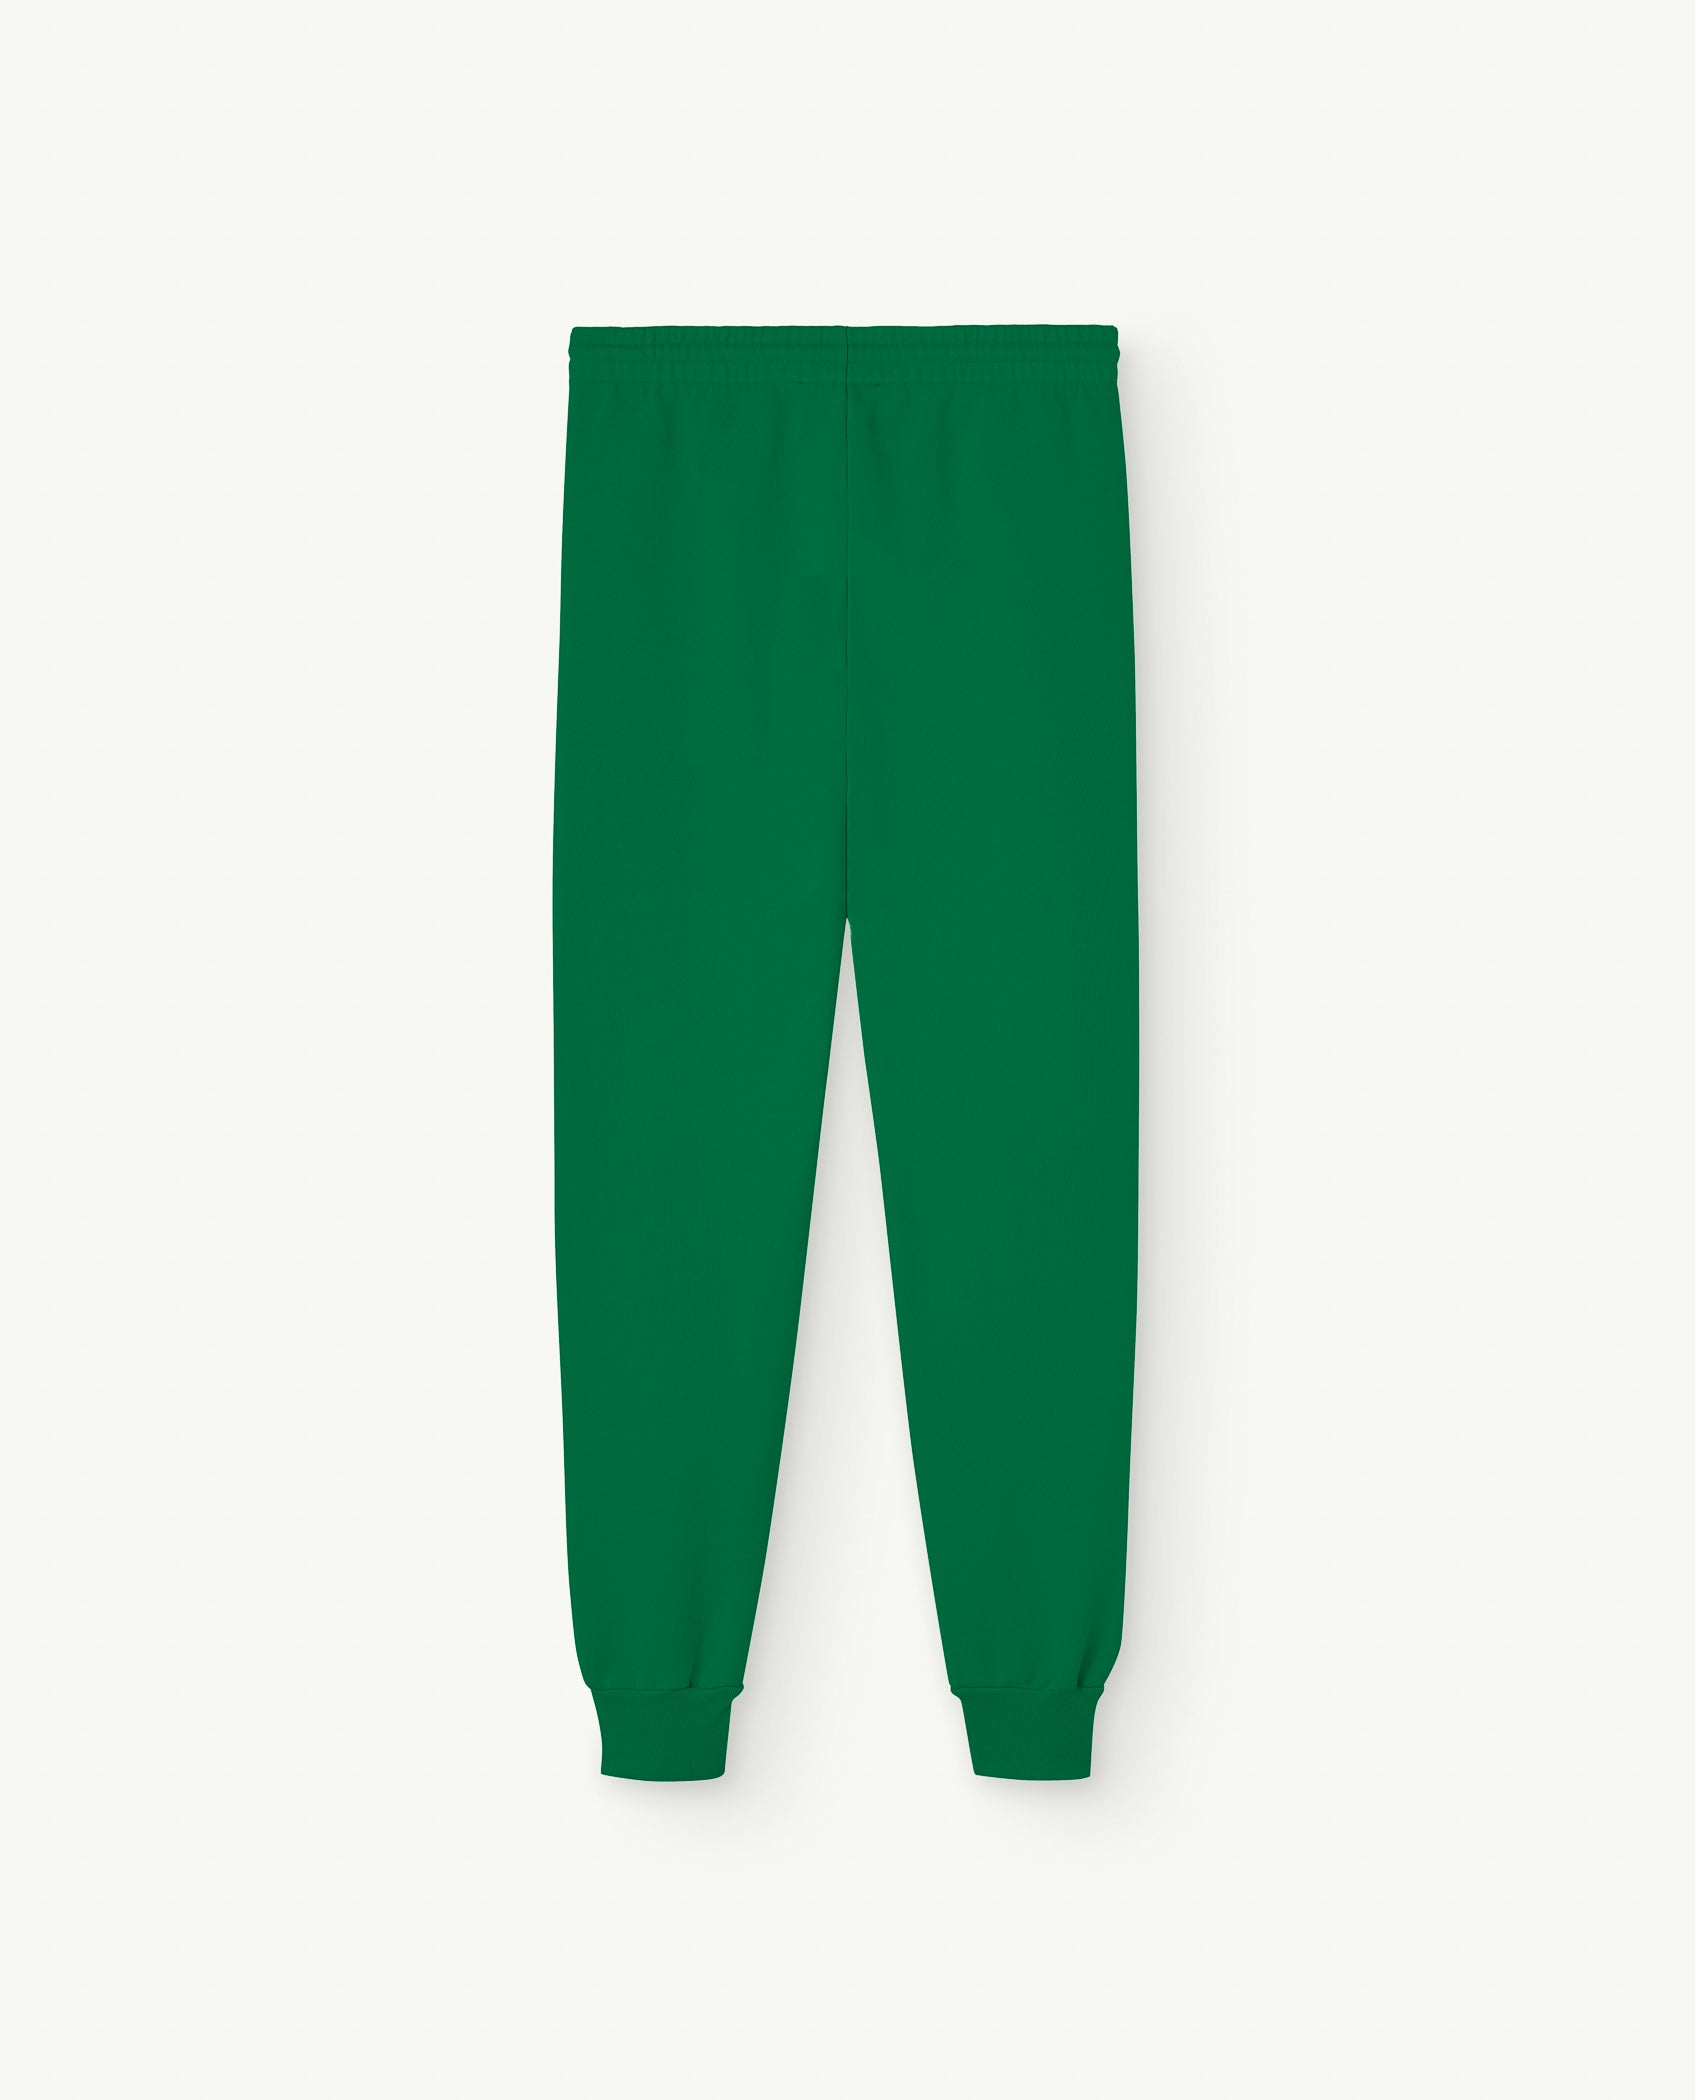 NEW The Animals Observatory WOMAN | Draco Sweatpants- Green